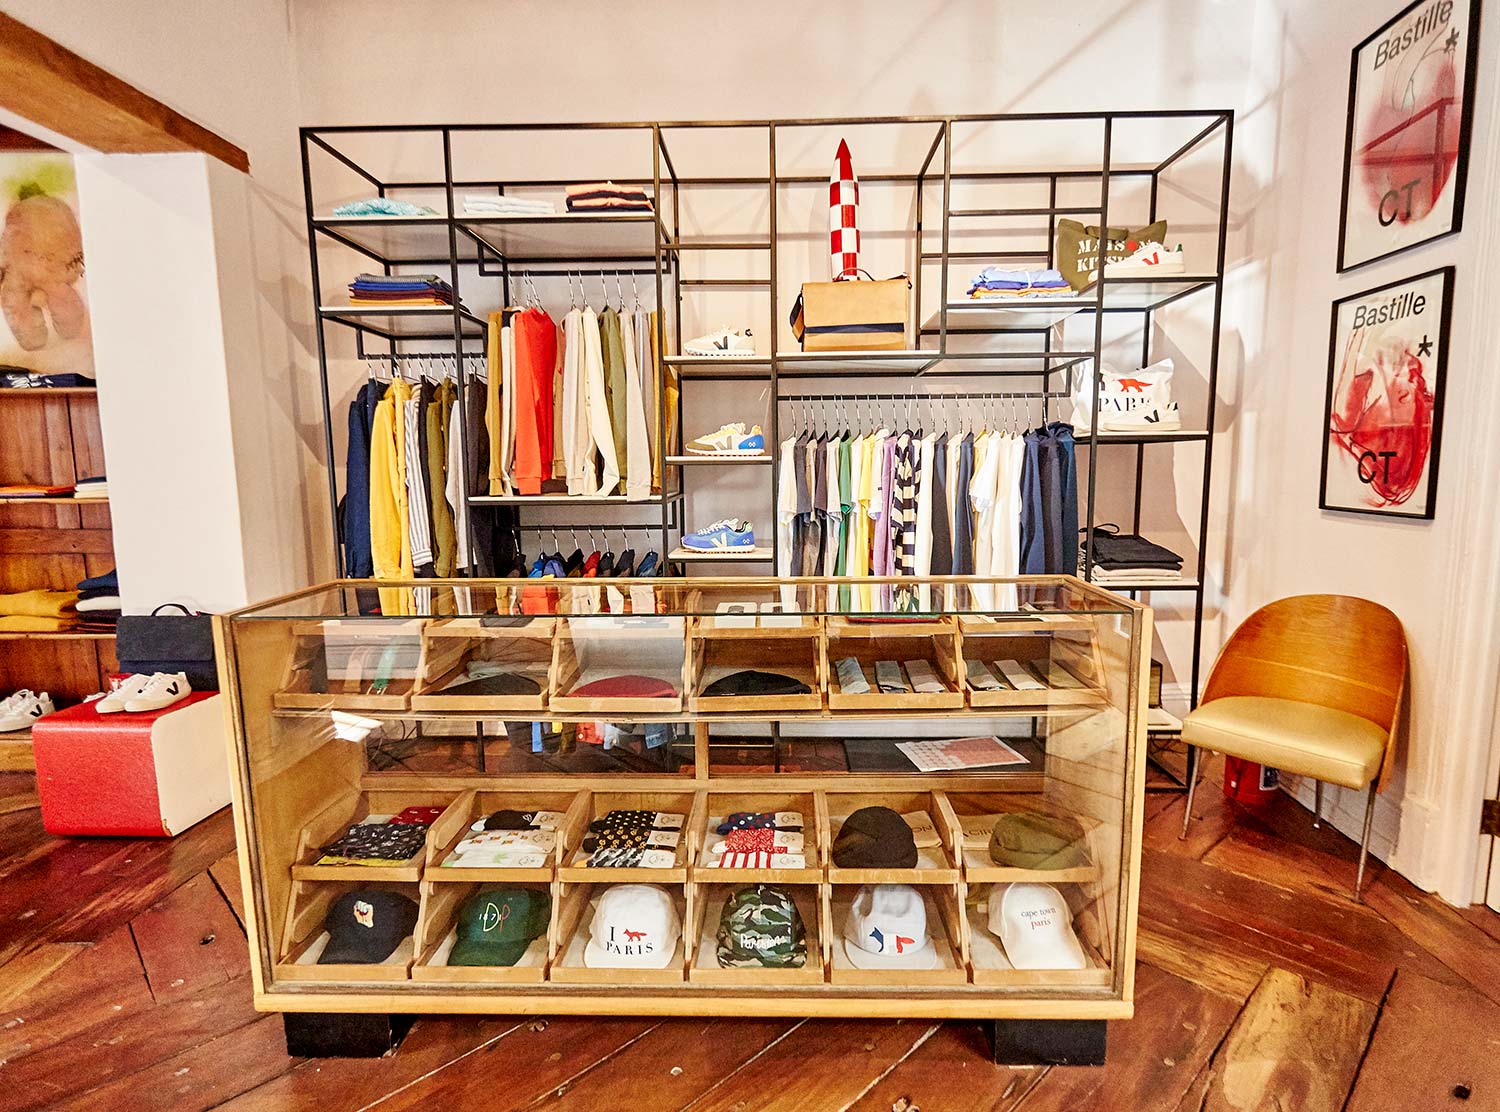 Bastille | Maison Mara has a well-curated selection of men’s and women’s wear